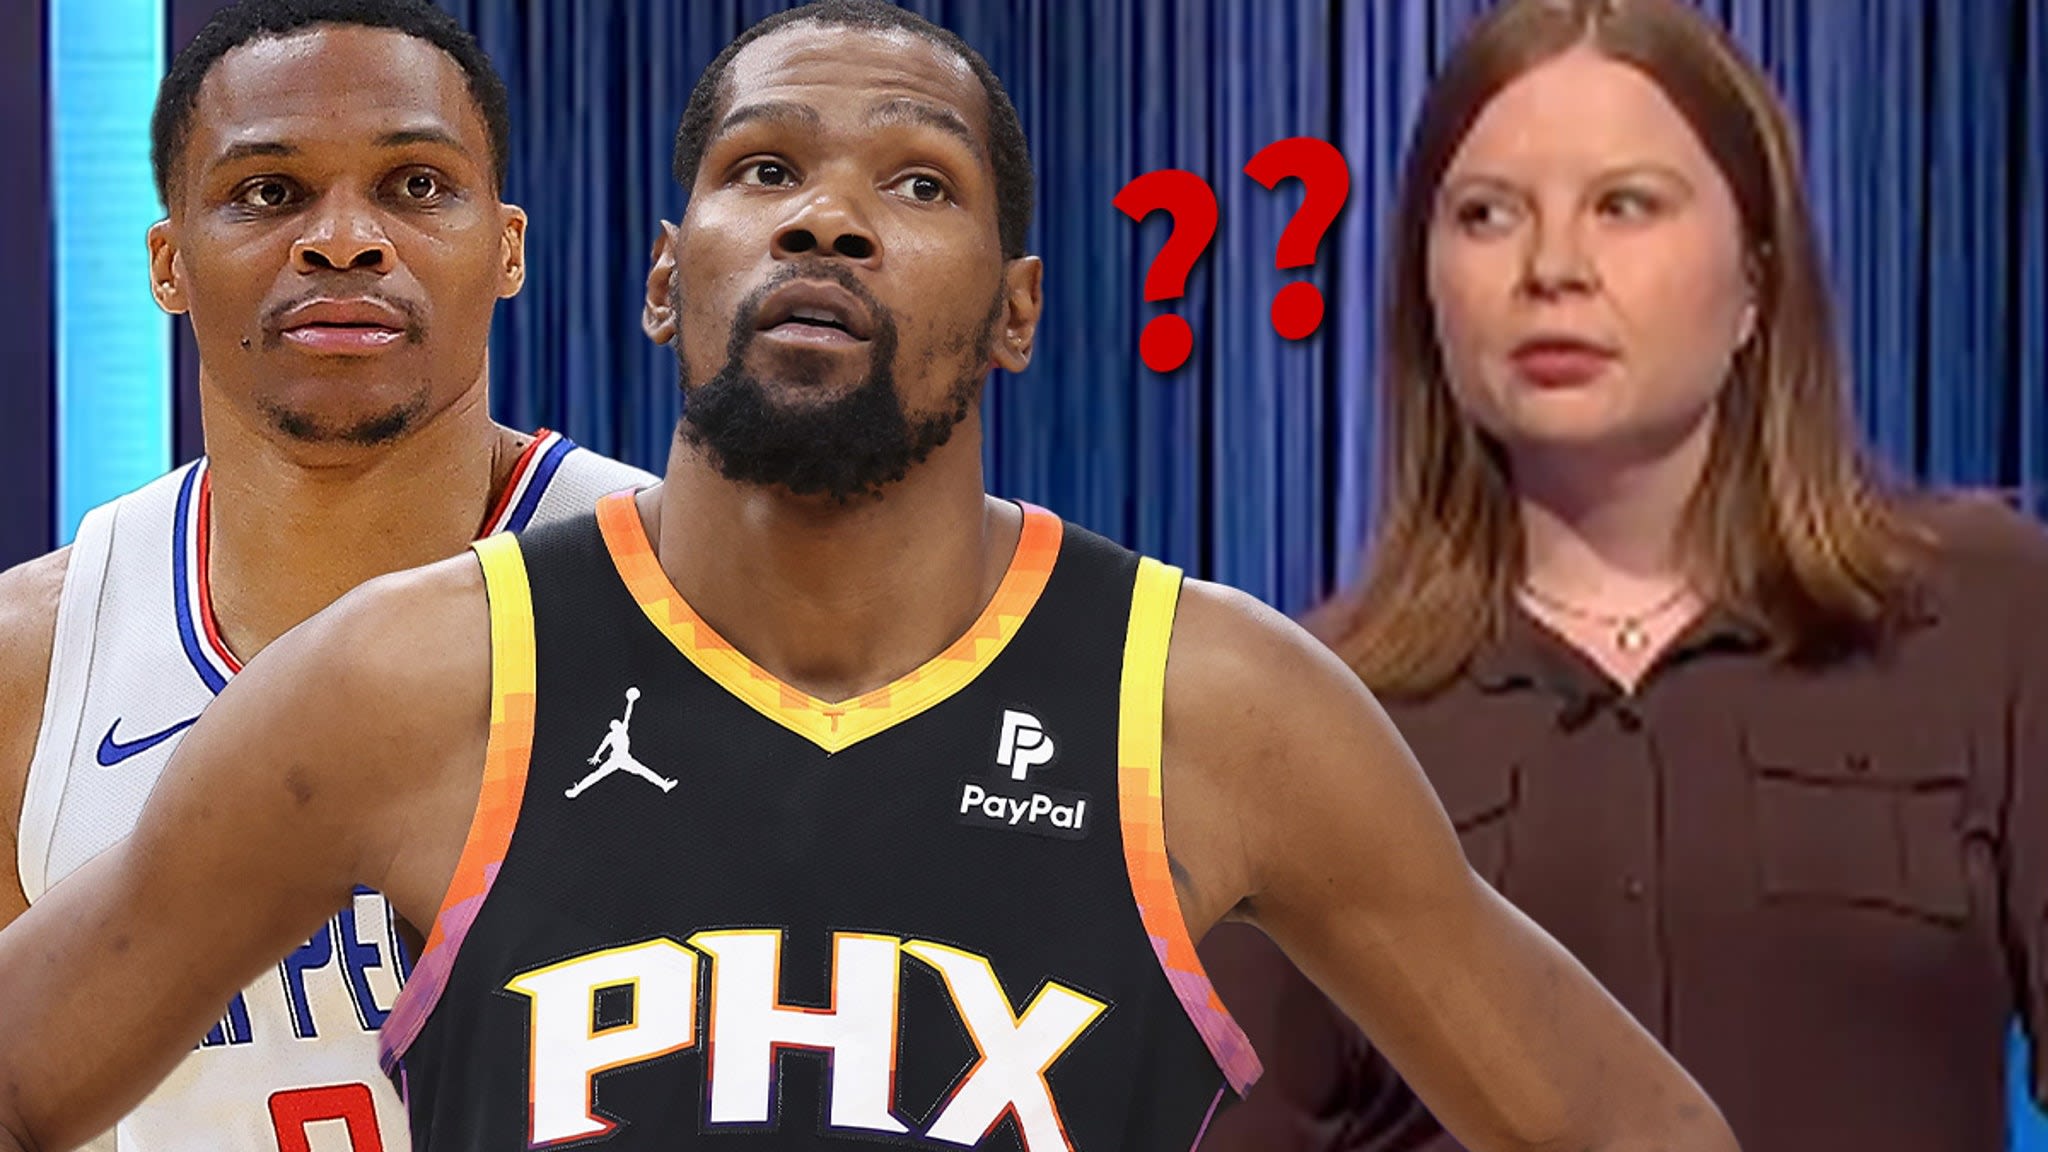 'Jeopardy!' Contestants Clowned For Whiffing On Easy Sports Questions